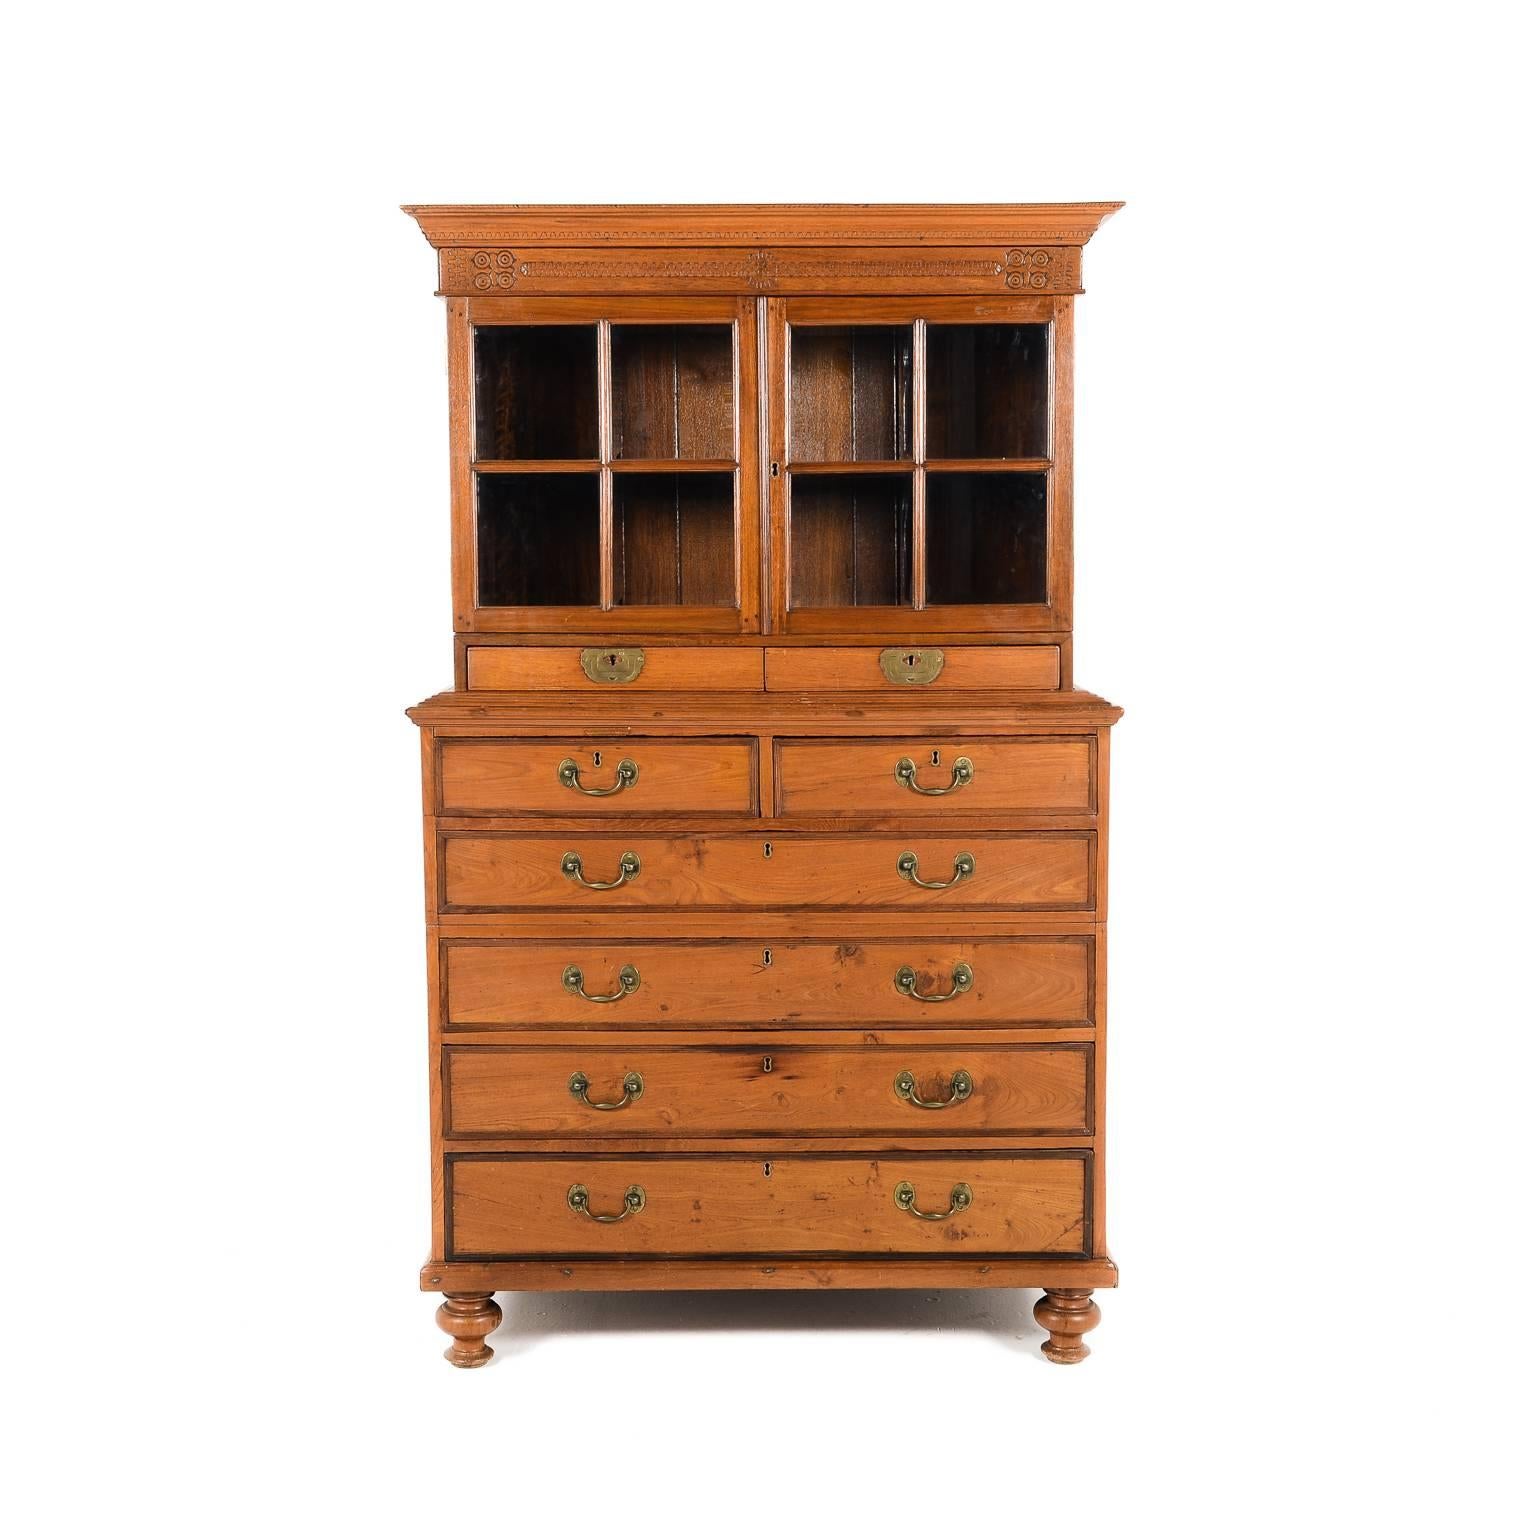 A rare Anglo-Indian colonial cabinet on chest, fitted with multiple drawers and an upper display portion. Likely a ‘Campaign’ piece, the chest separates into two sections and the upper cabinet lifts off for easier transport, circa 1870.





